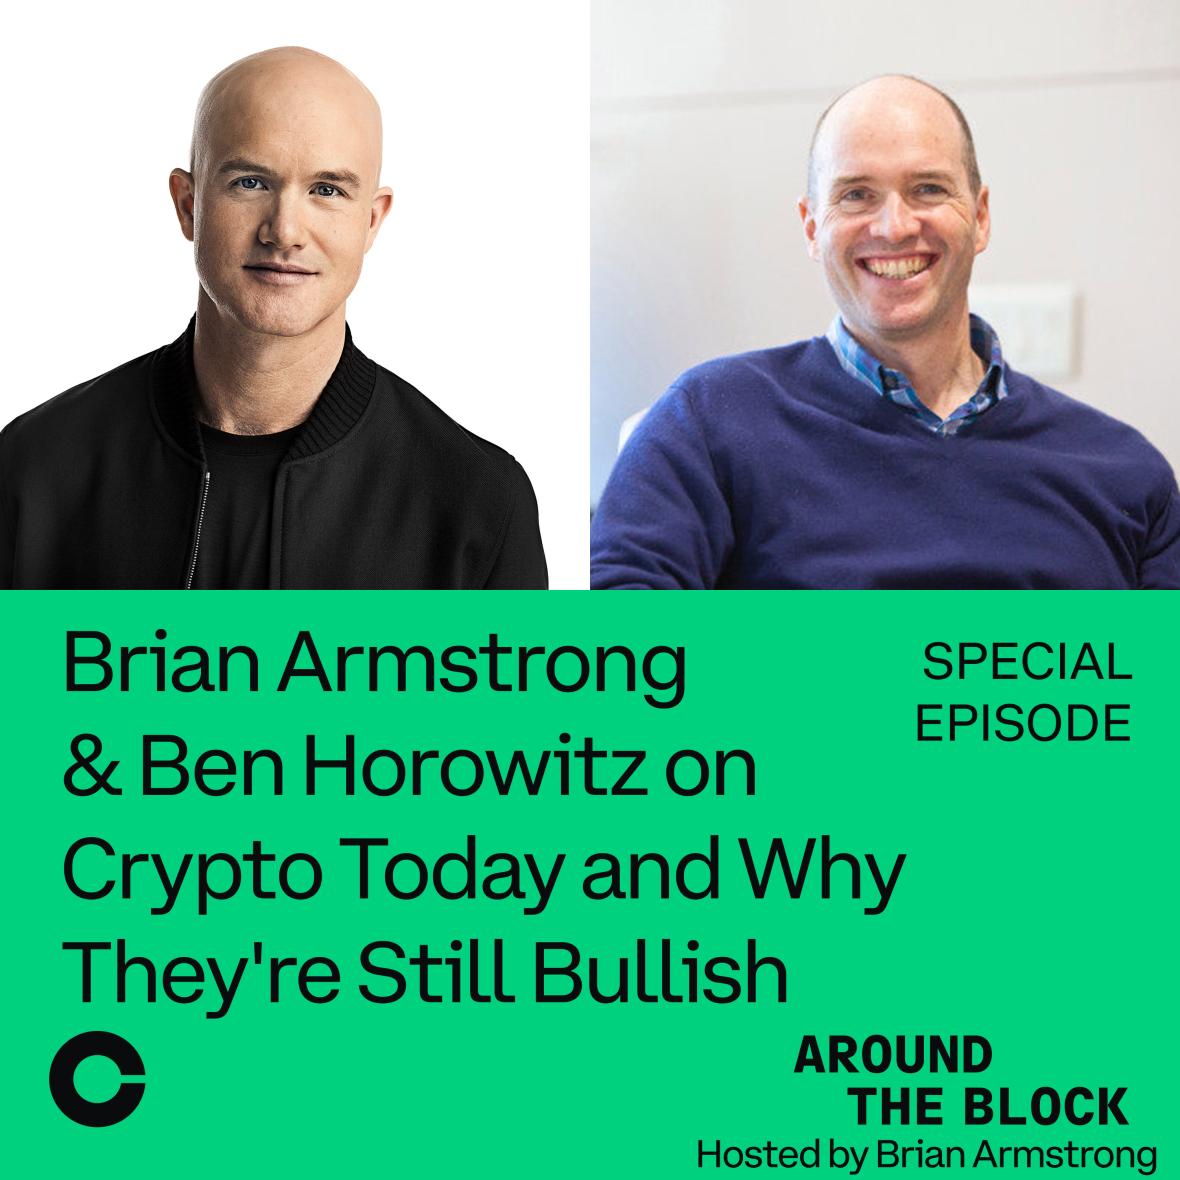 Brian Armstrong & Ben Horowitz on Crypto Today and Why They're Still Bullish